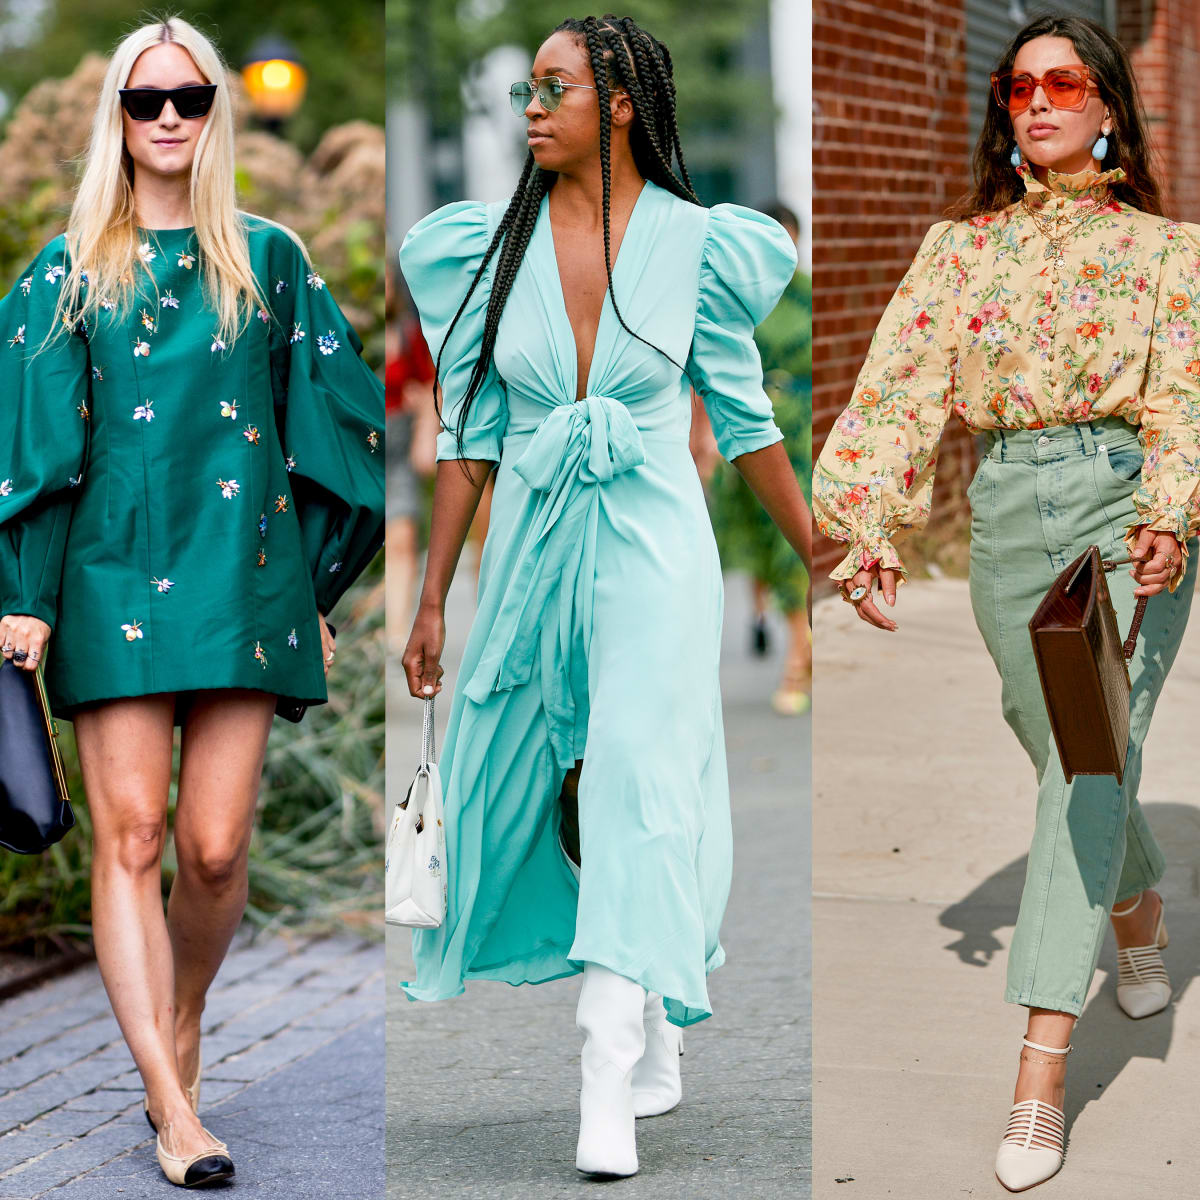 Top 5 Best Fashion Trends For Girls In 2020